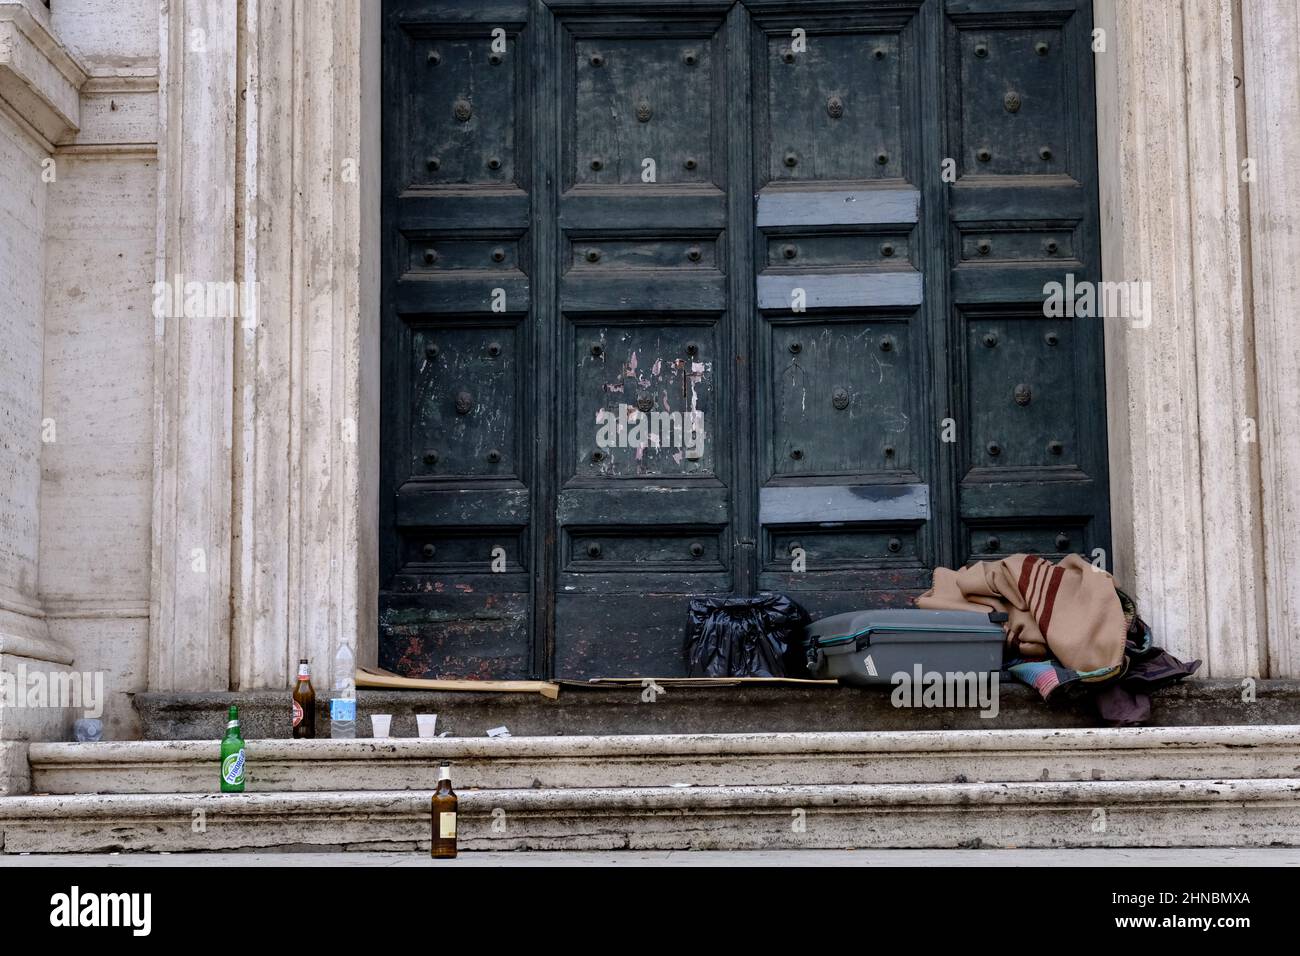 The belongings of a homeless person on the steps of a church in Rome Italy. It is believed that there are up to 8,000 homeless people in the Italian c Stock Photo